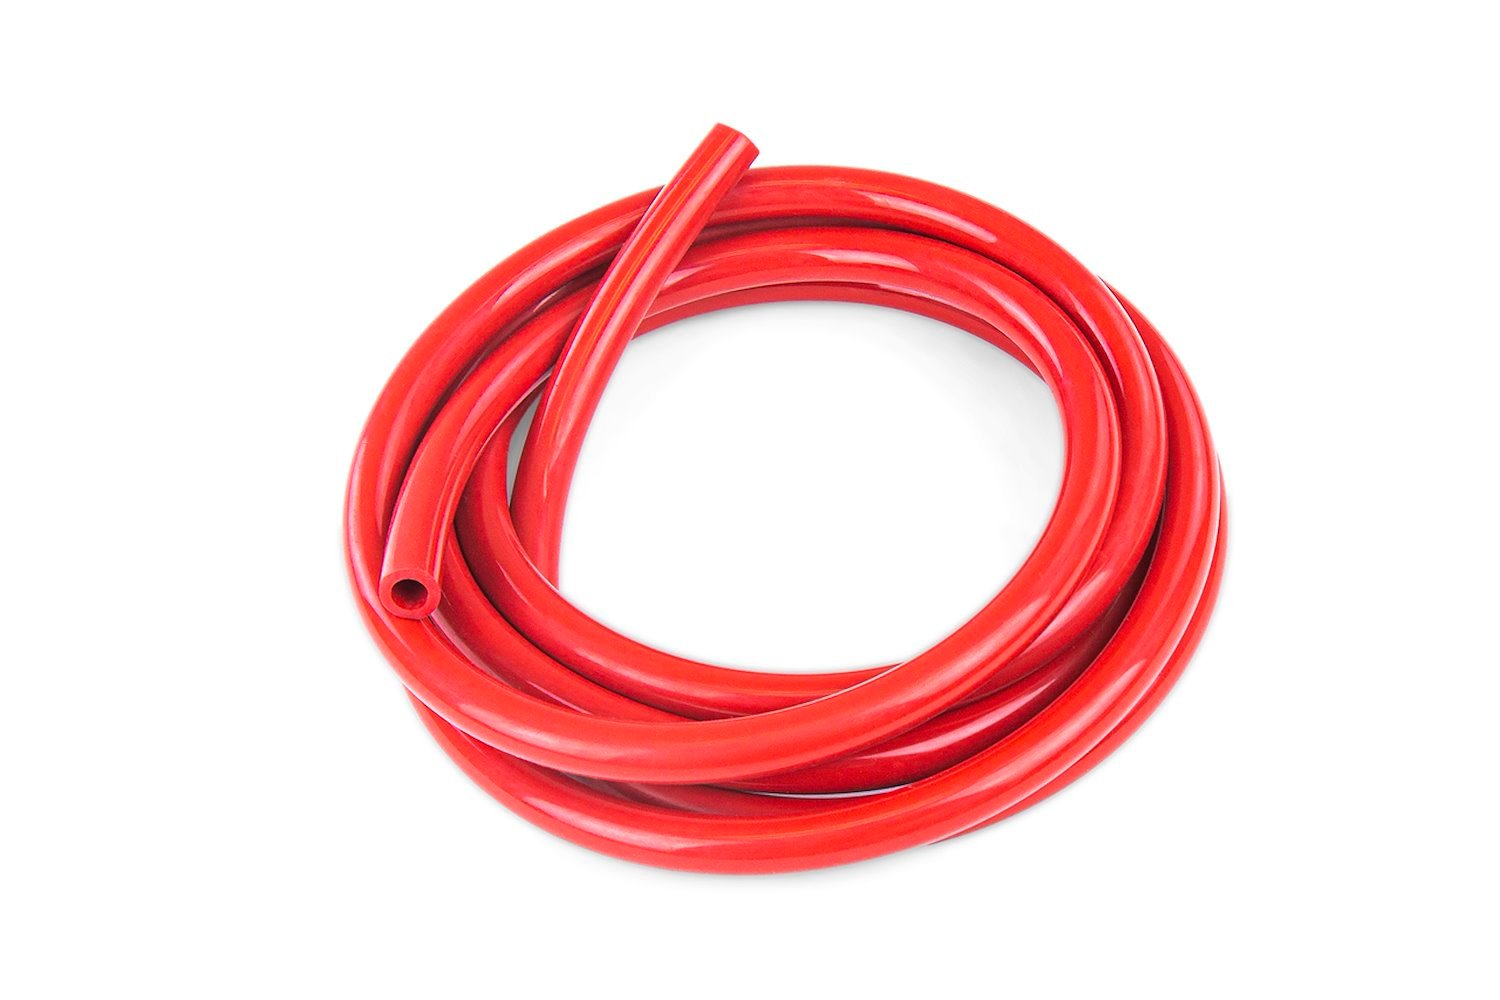 HTSVH10-REDx5 High-Temperature Silicone Vacuum Hose Tubing, 10 mm ID, 5 ft. Roll, Red